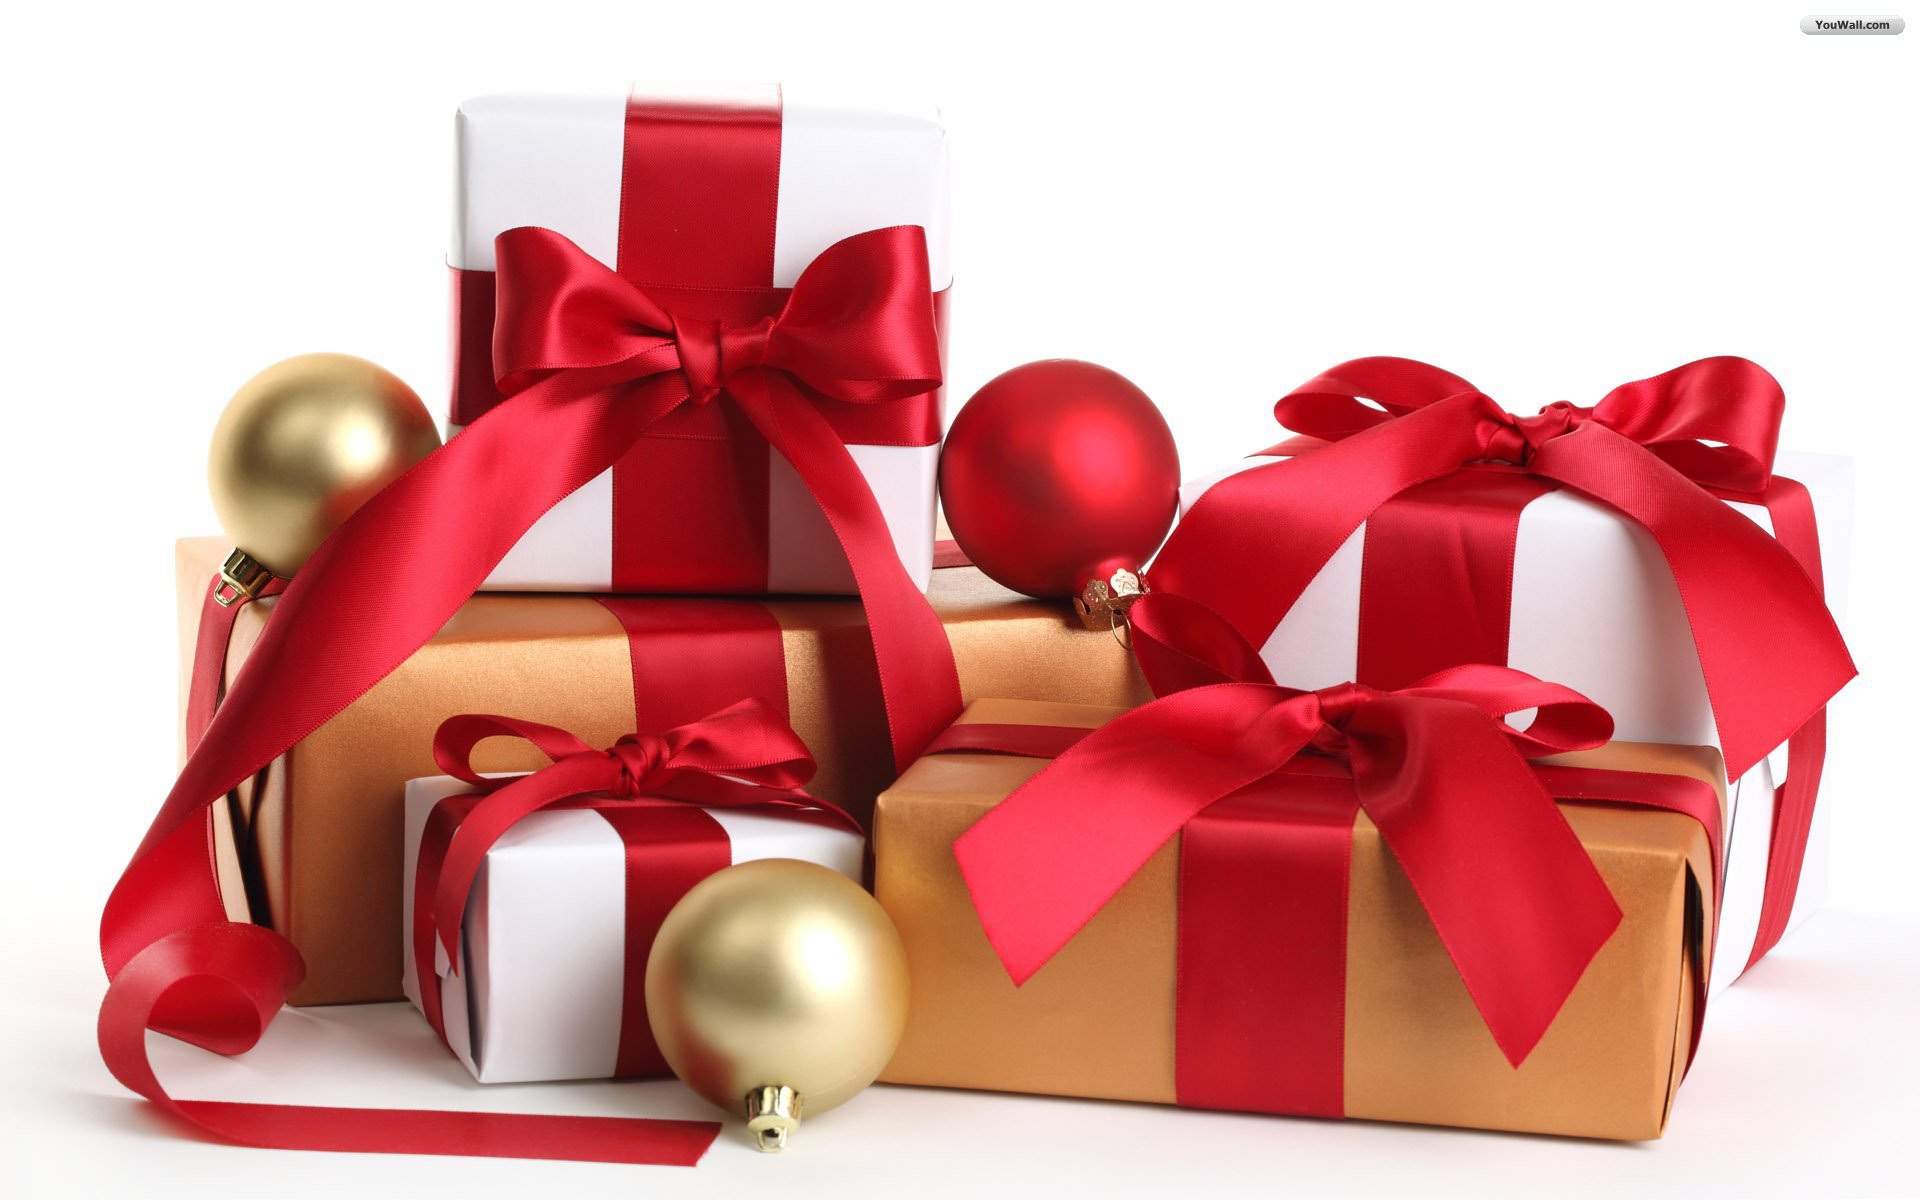 Bad At Wrapping? Don’t Worry This Christmas With These Amazing Tips